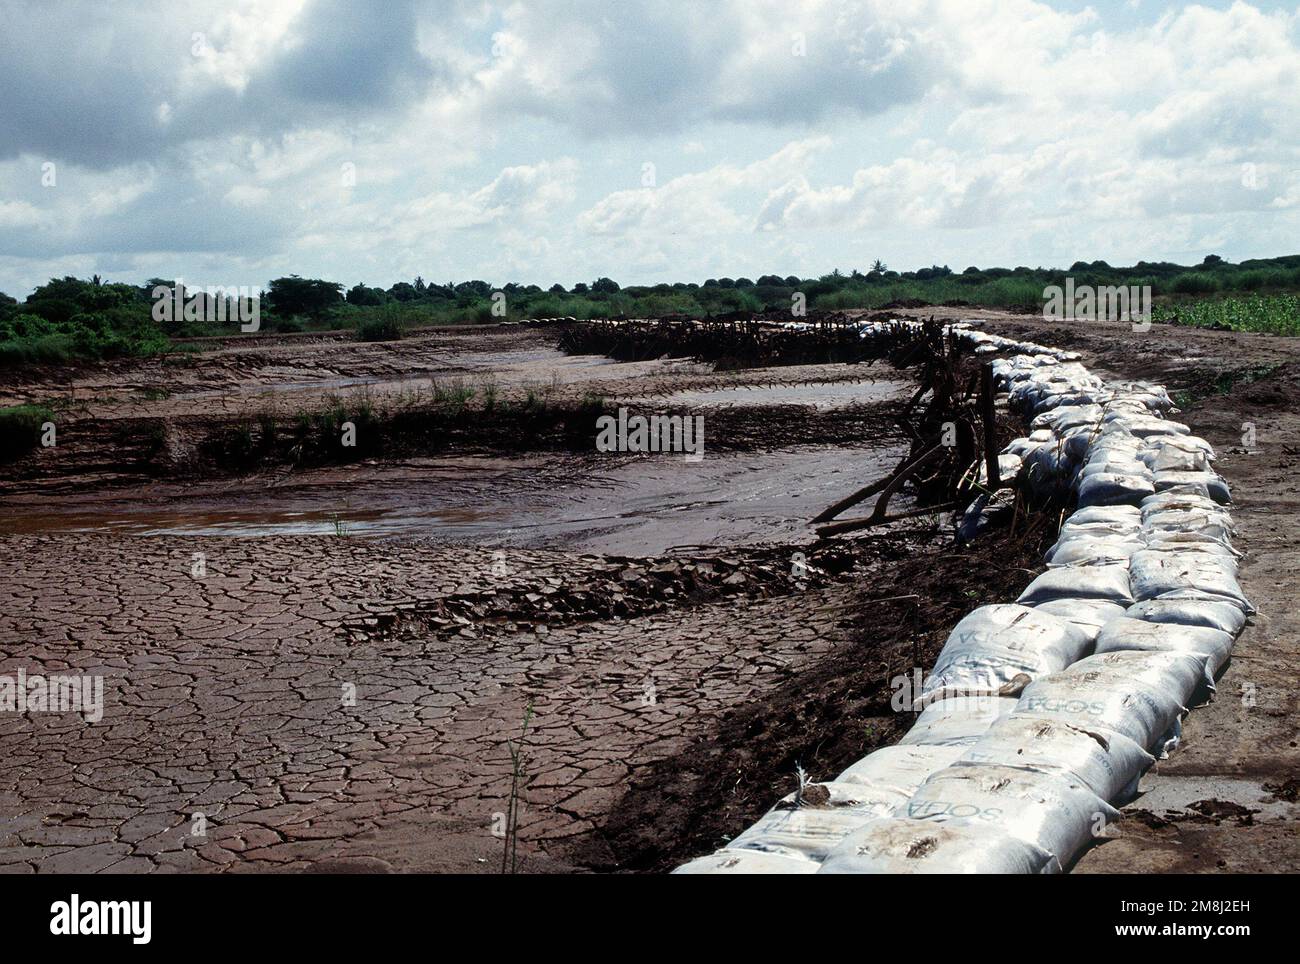 A dam built by the Belgian contingent to control flood waters in Kismayo. The Belgians are part of the United Nations forces in Somalia in support of OPERATION CONTINUE HOPE. Subject Operation/Series: CONTINUE HOPE Base: Kismayo Country: Somalia (SOM) Stock Photo